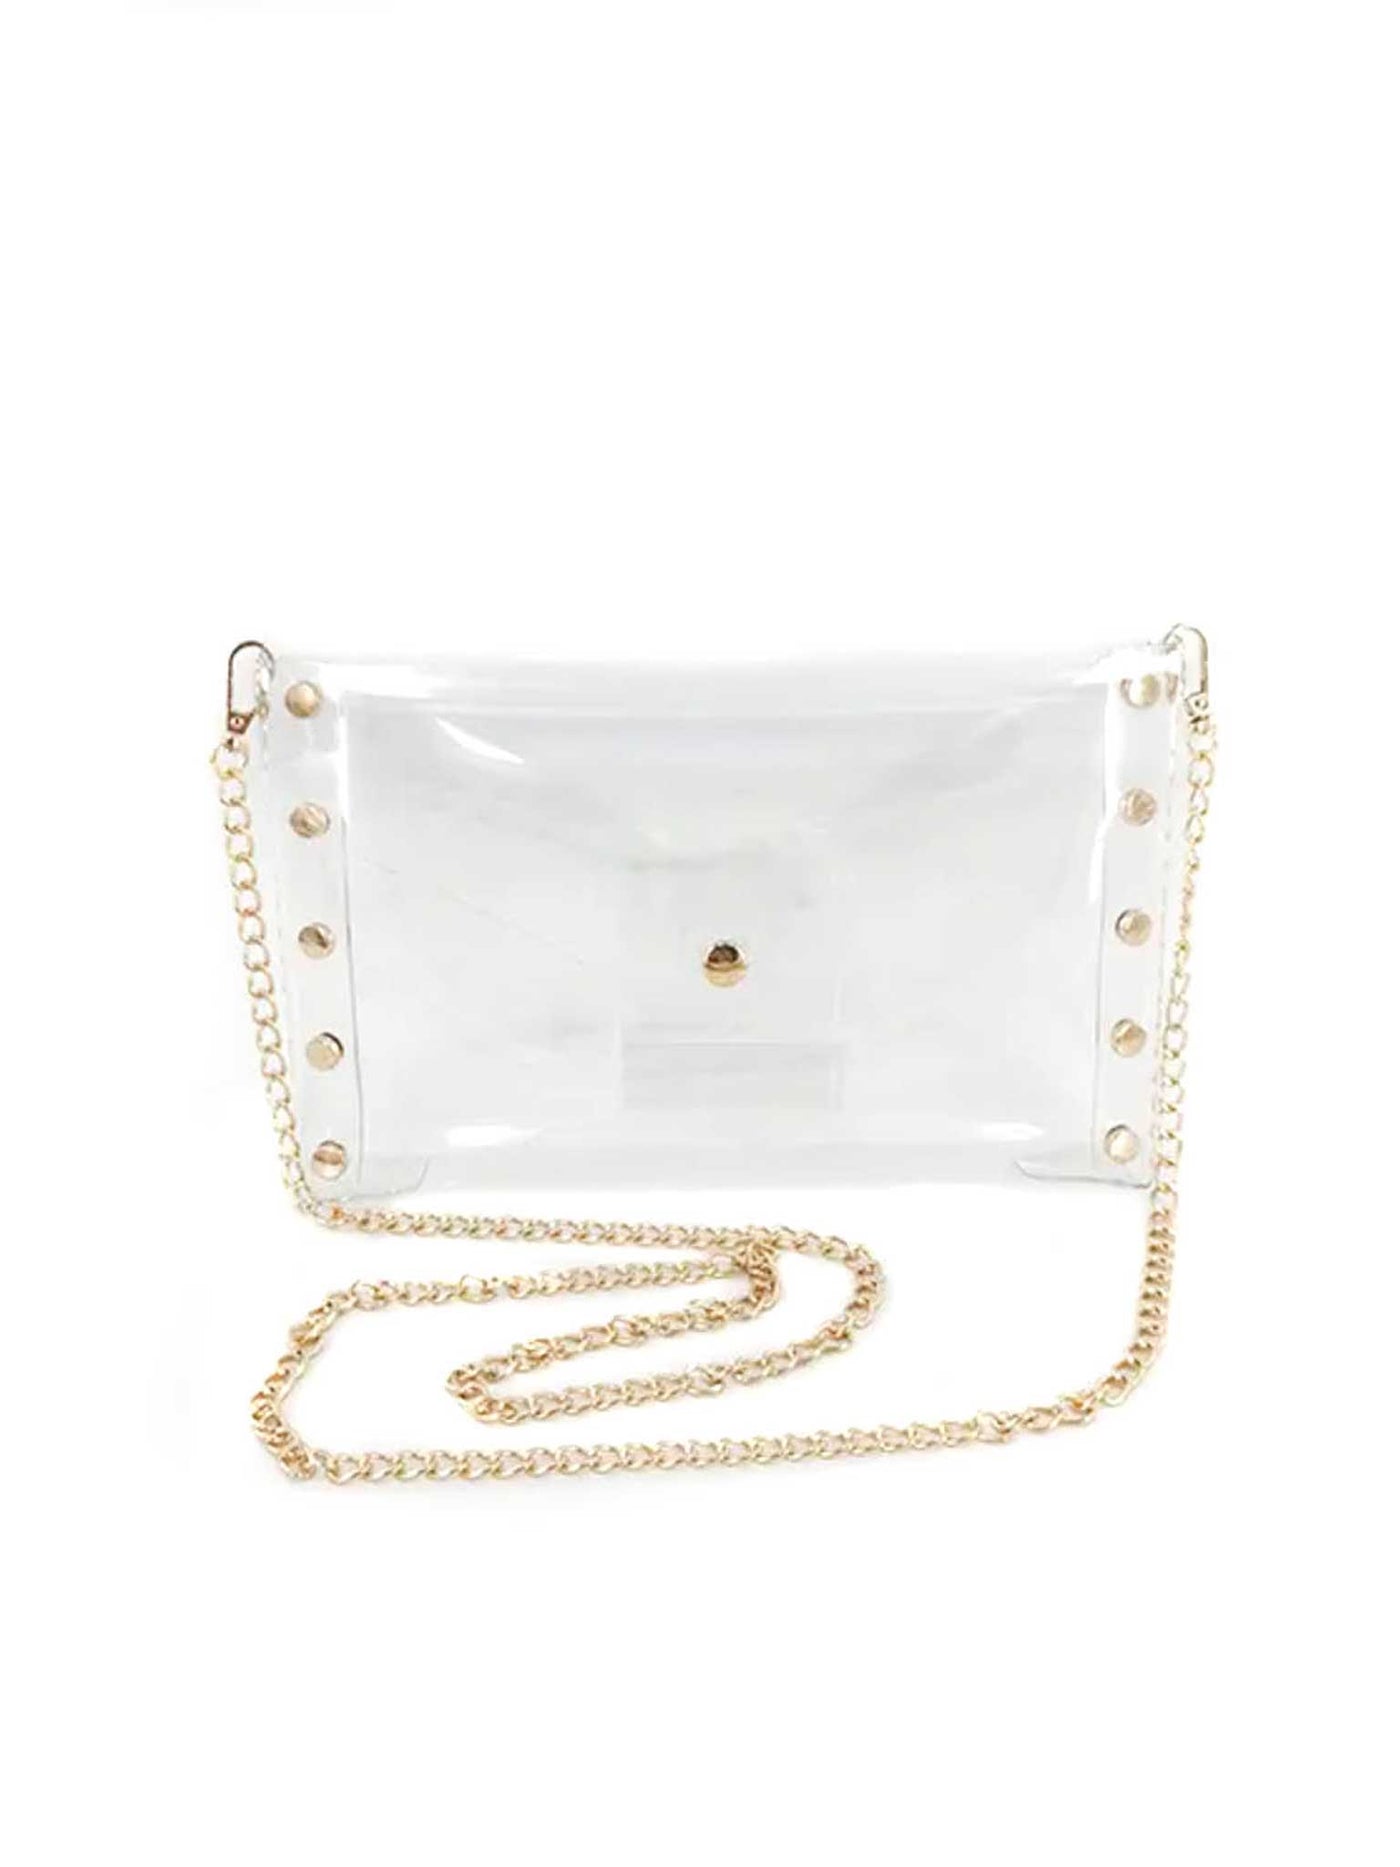 Studded Clear Envelope Purse